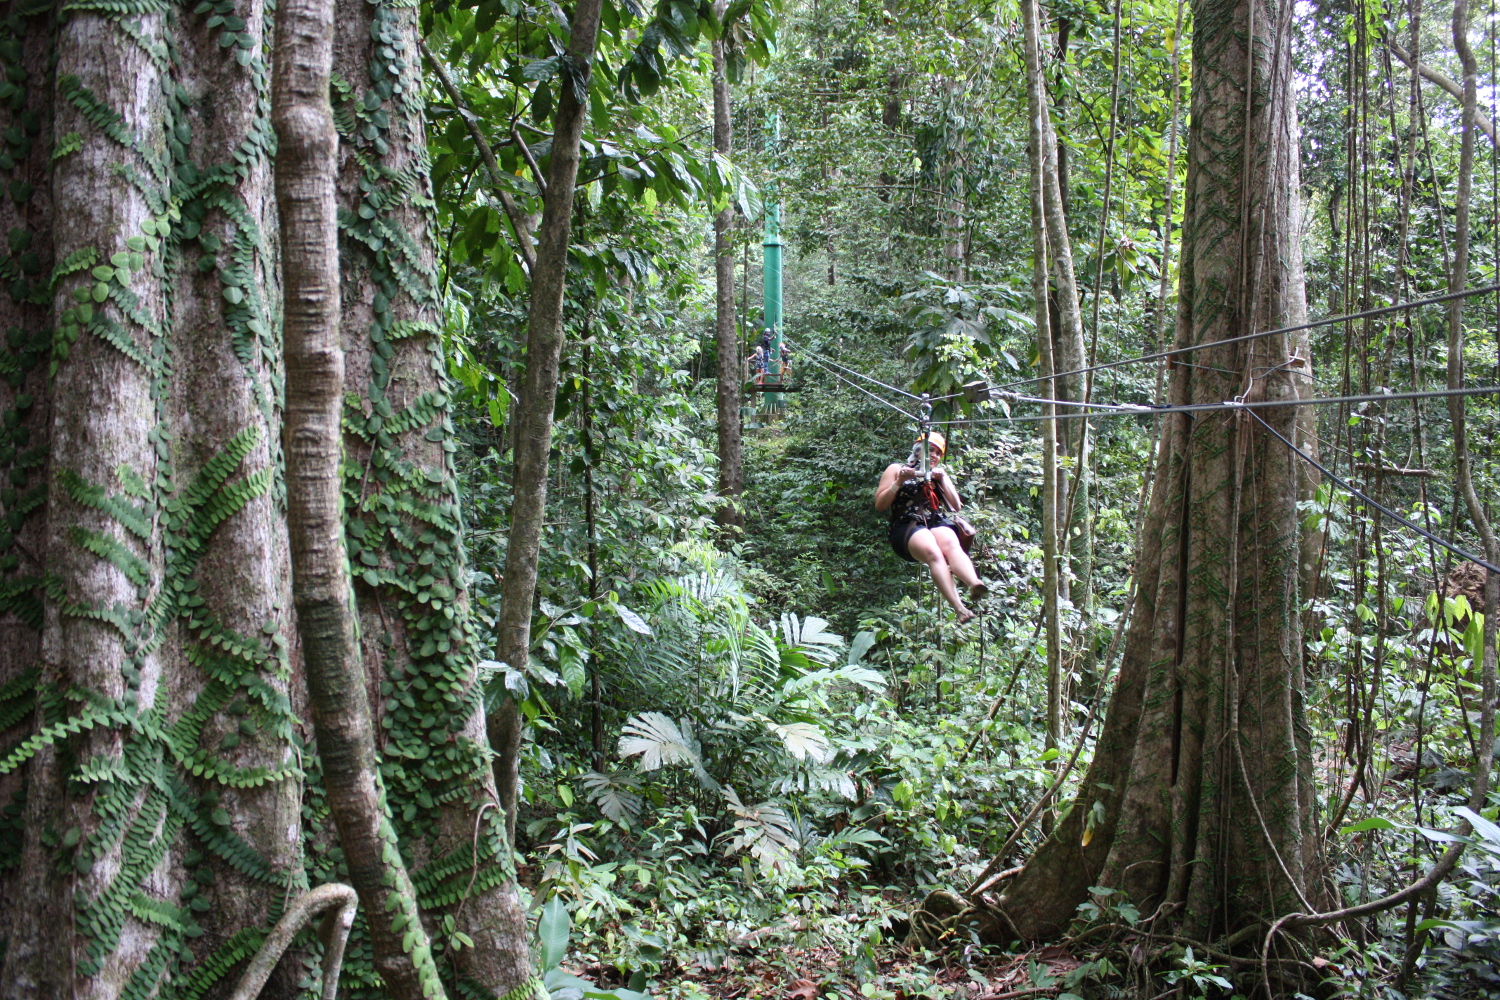 Brushing shoulders with the rainforest canopy: only on a zipline. Image by Lorna Parkes / Lonely Planet